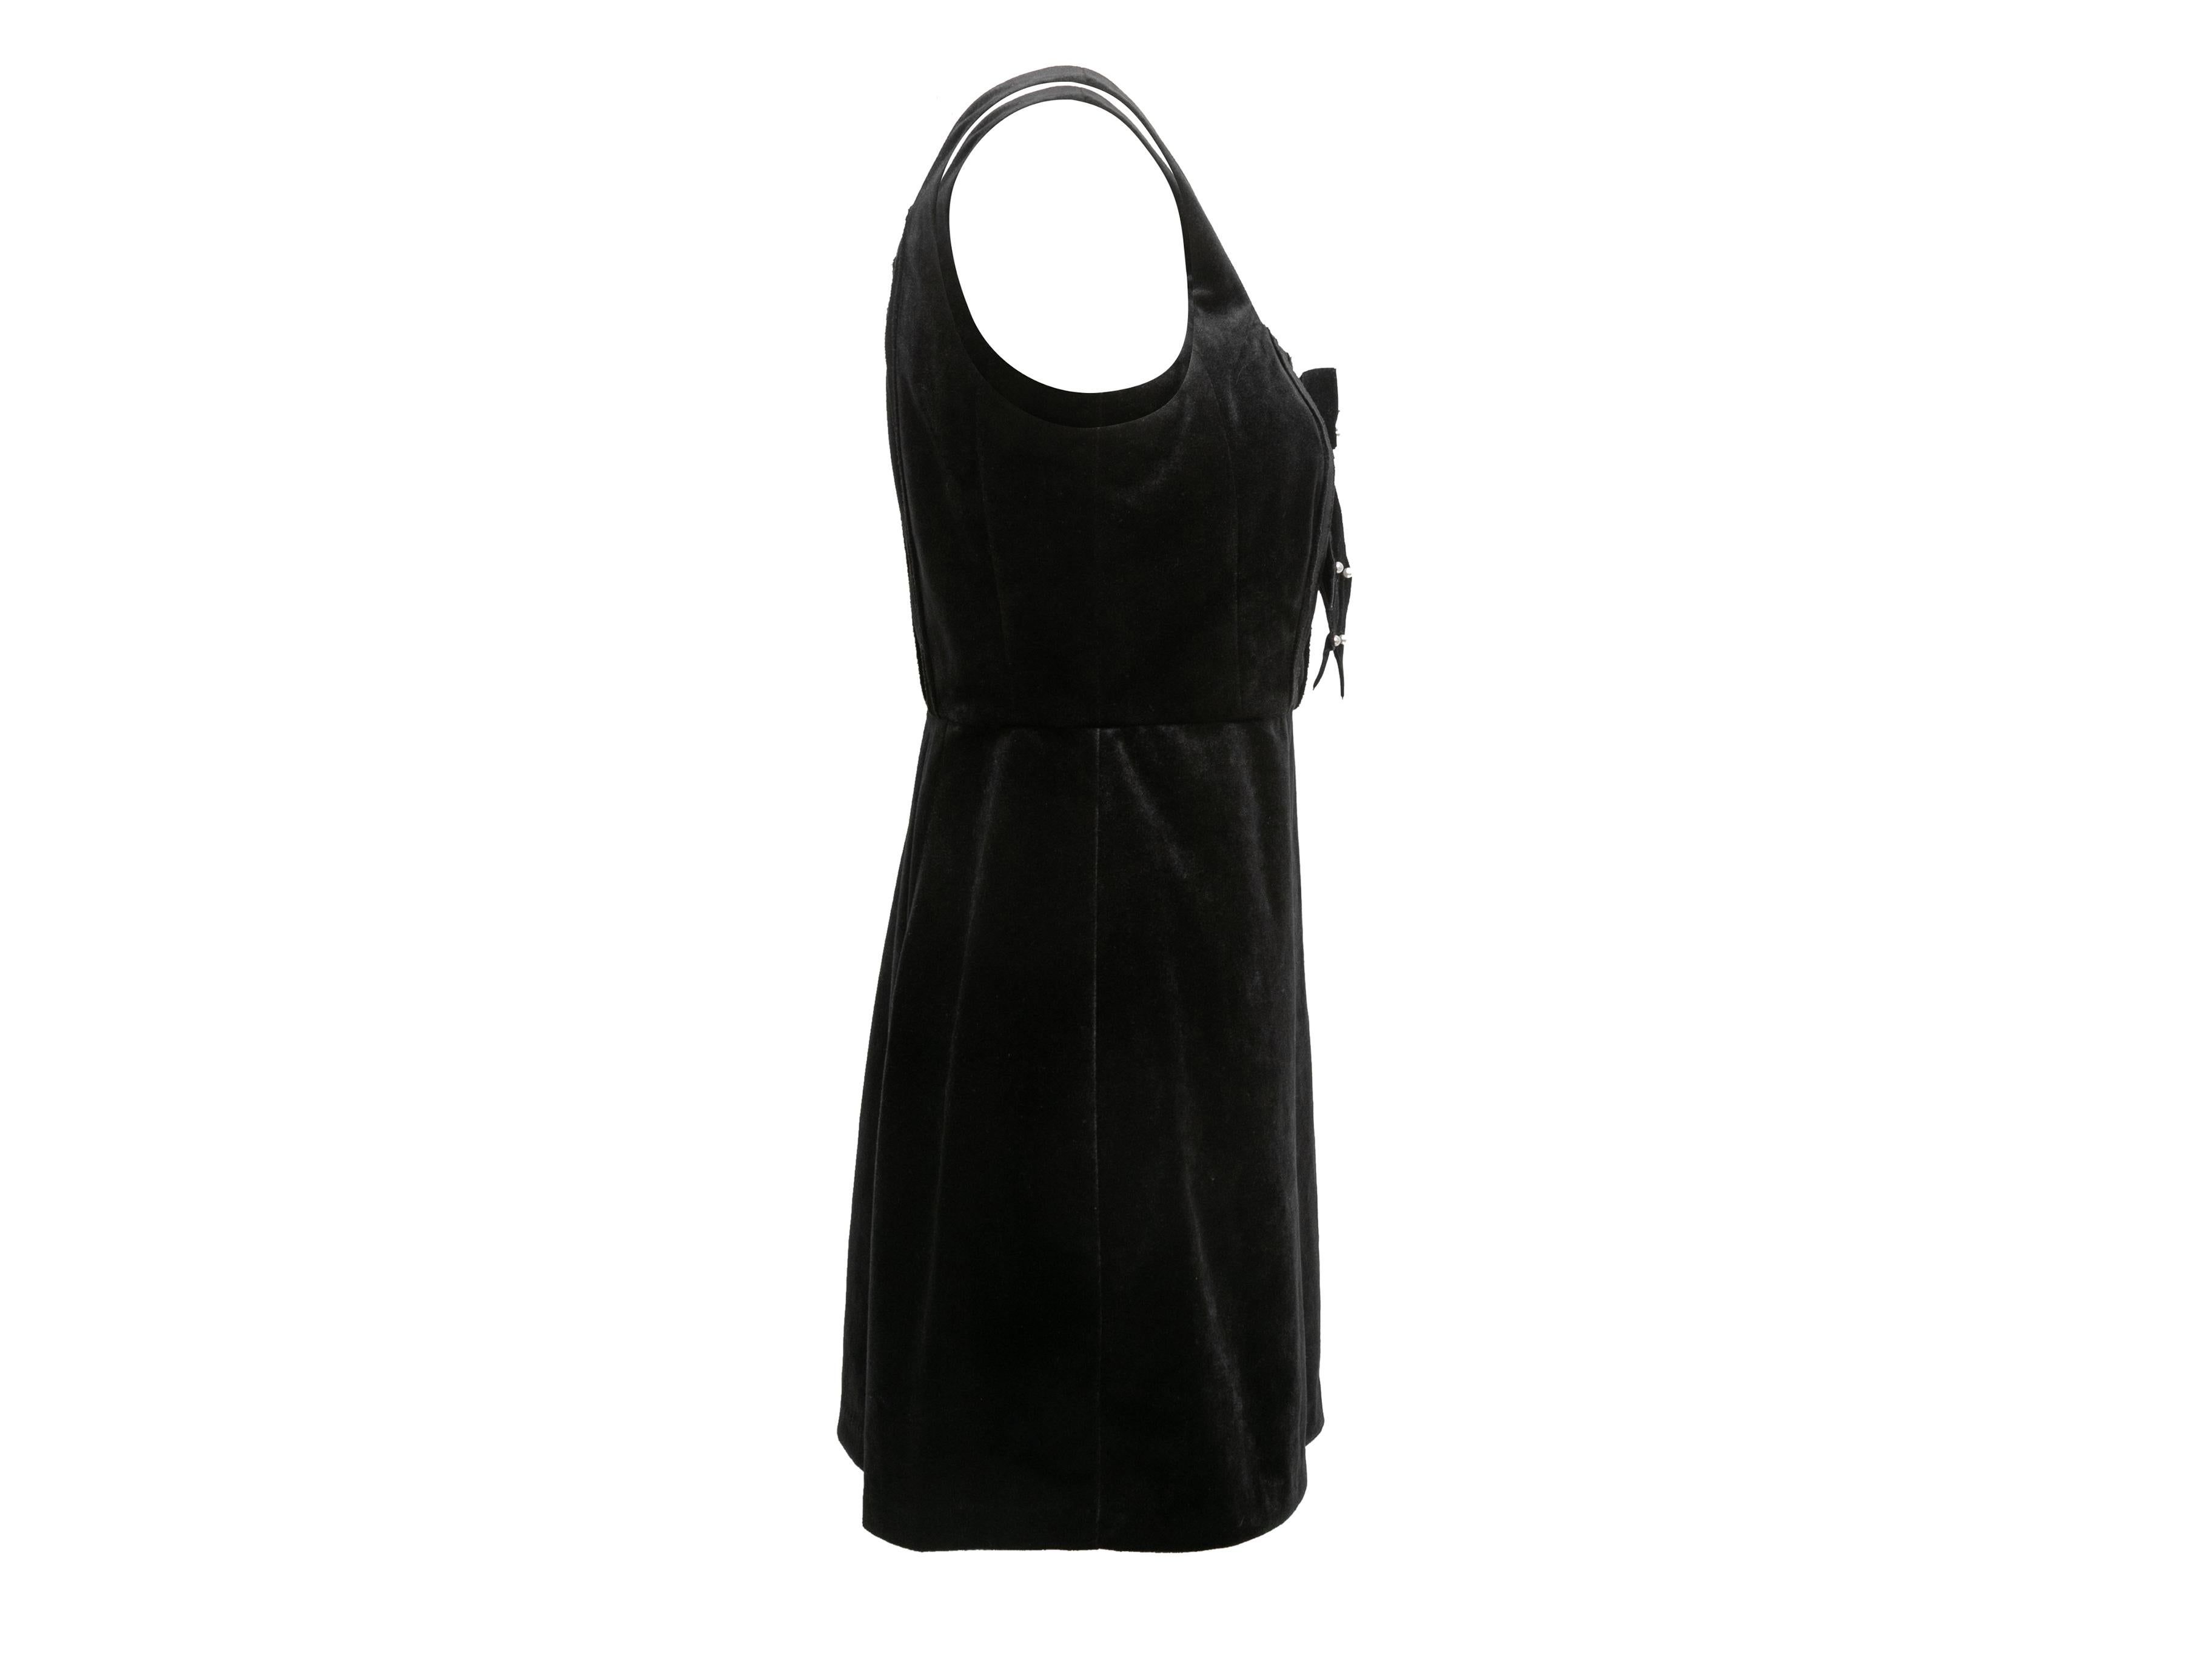 Black velvet sleeveless mini dress by LoveShackFancy. Scoop neckline. Faux pearl-embellished bow at front. Zip closure at back. 32